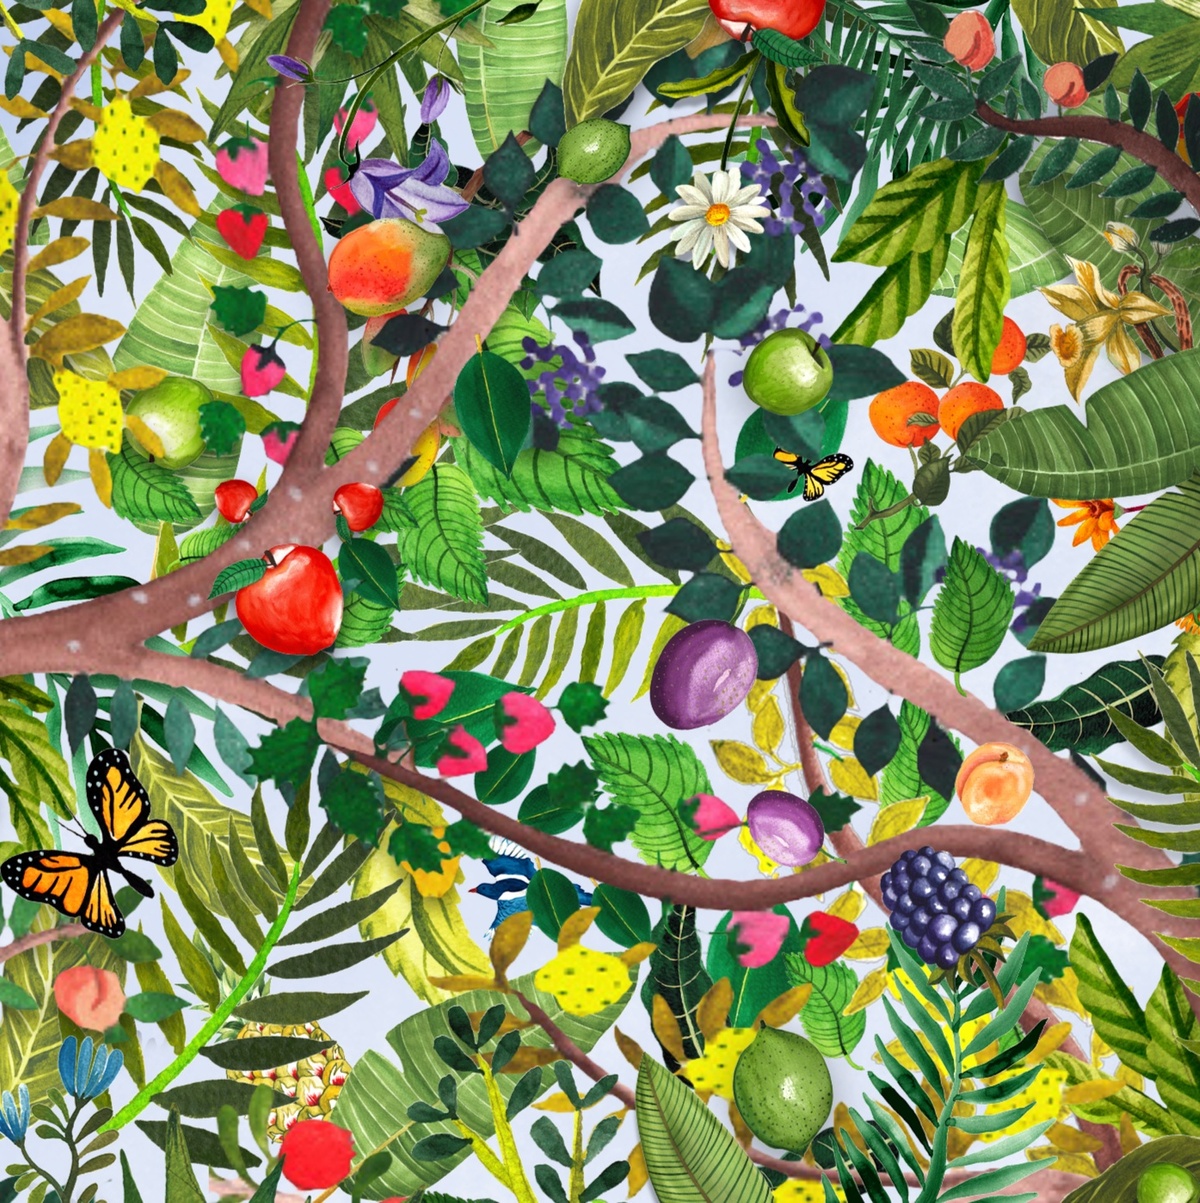 Fruit, leaves and branch illustrations